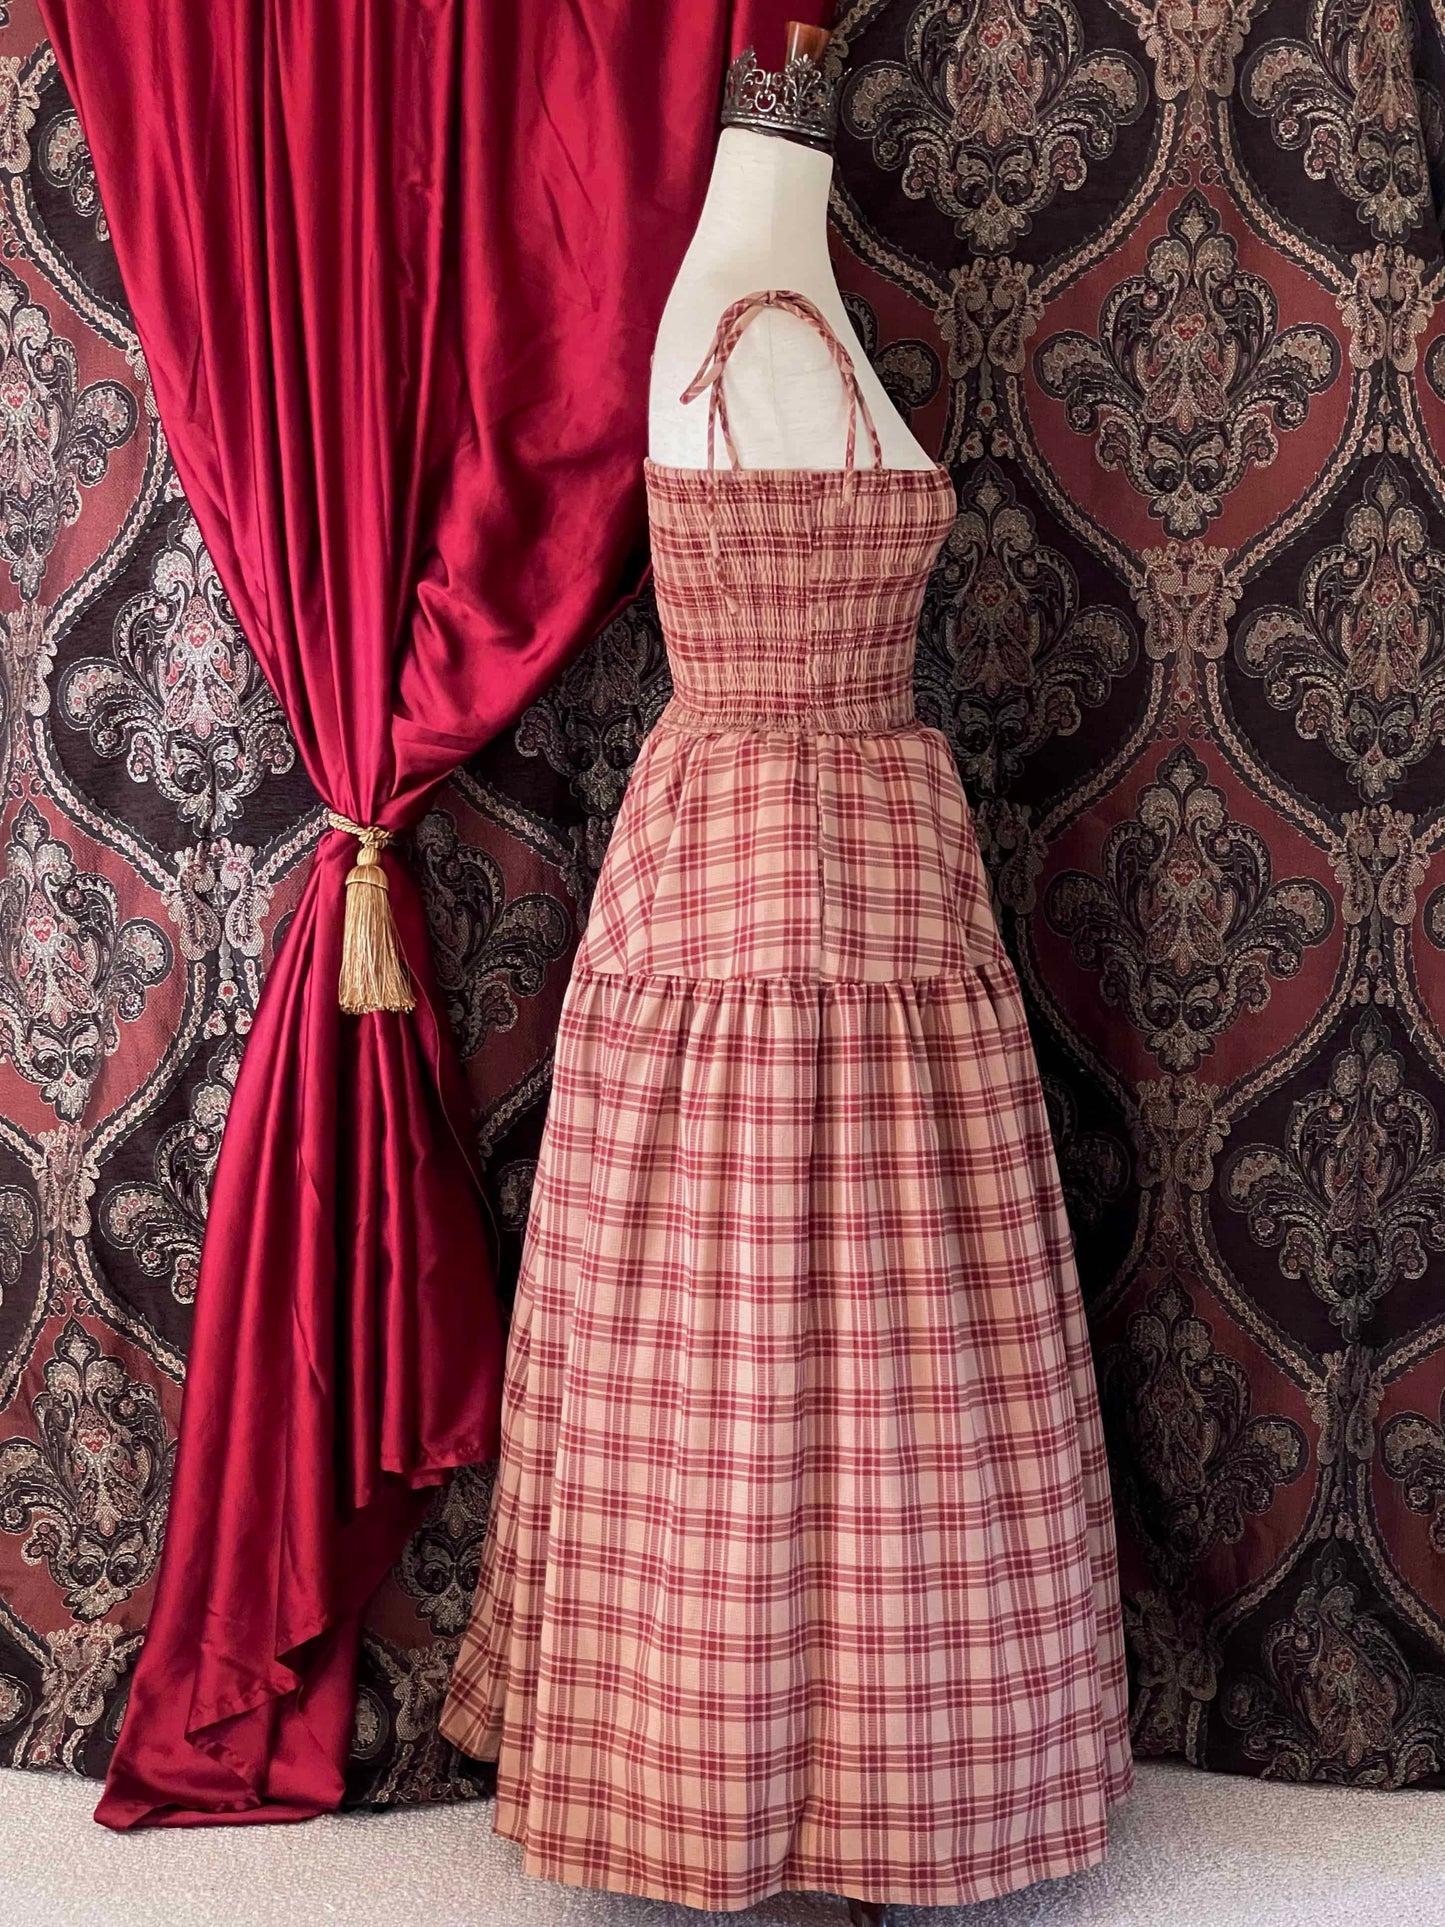 An early medieval era, Anglo Saxon, historically inspired rust and burgundy tartan plaid smocked maxi dress with tiered skirt pictured on a mannequin.